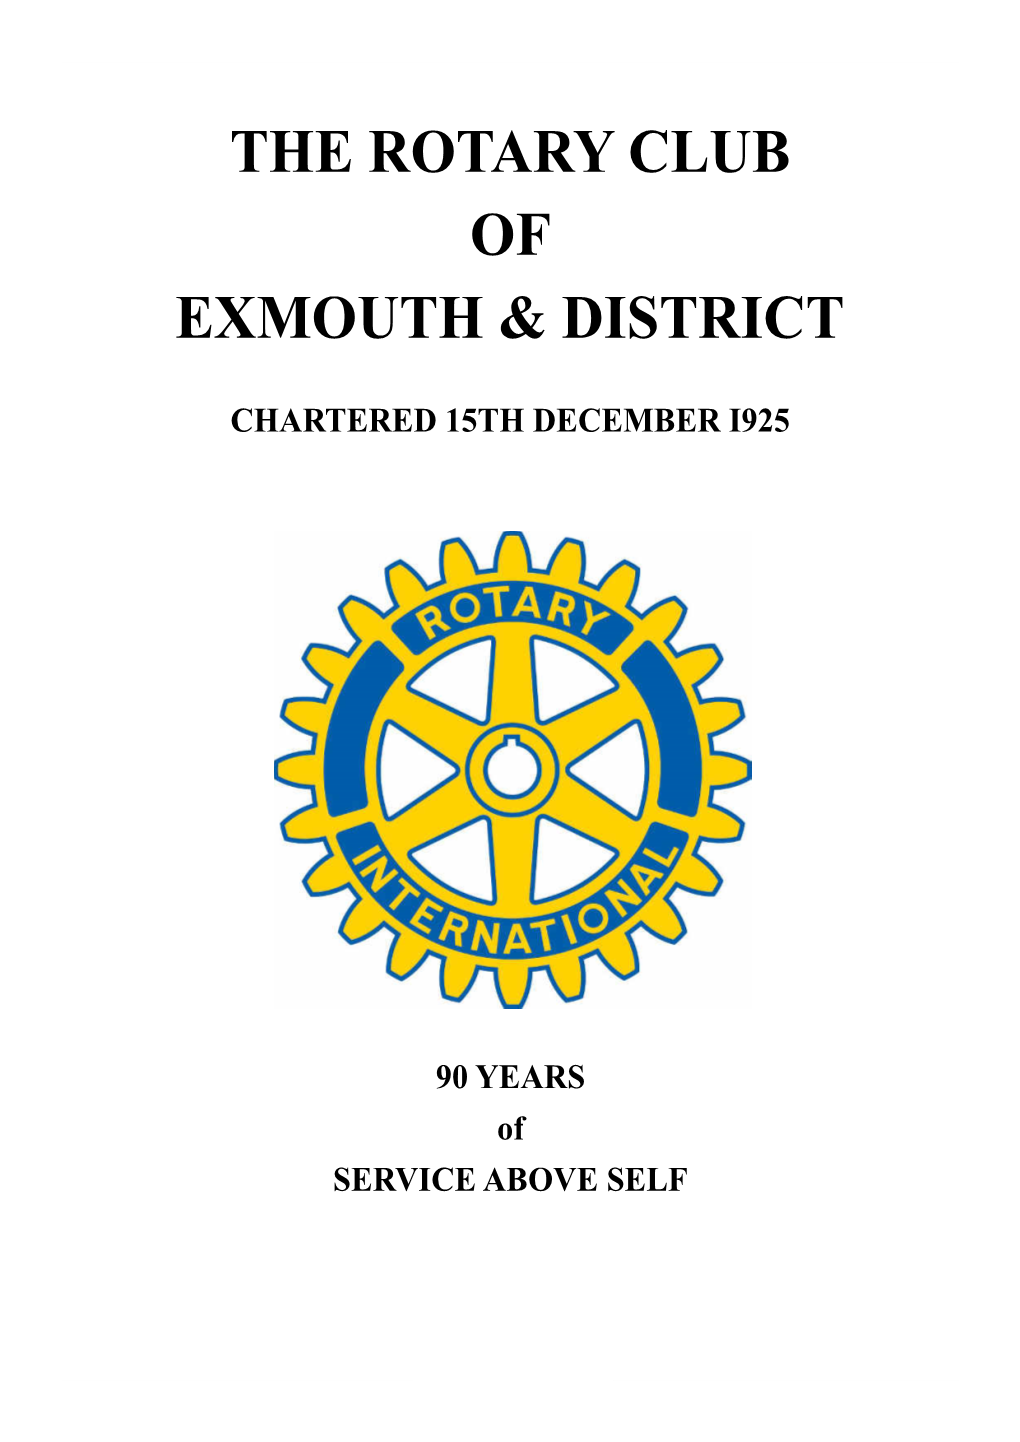 The Rotary Club of Exmouth & District